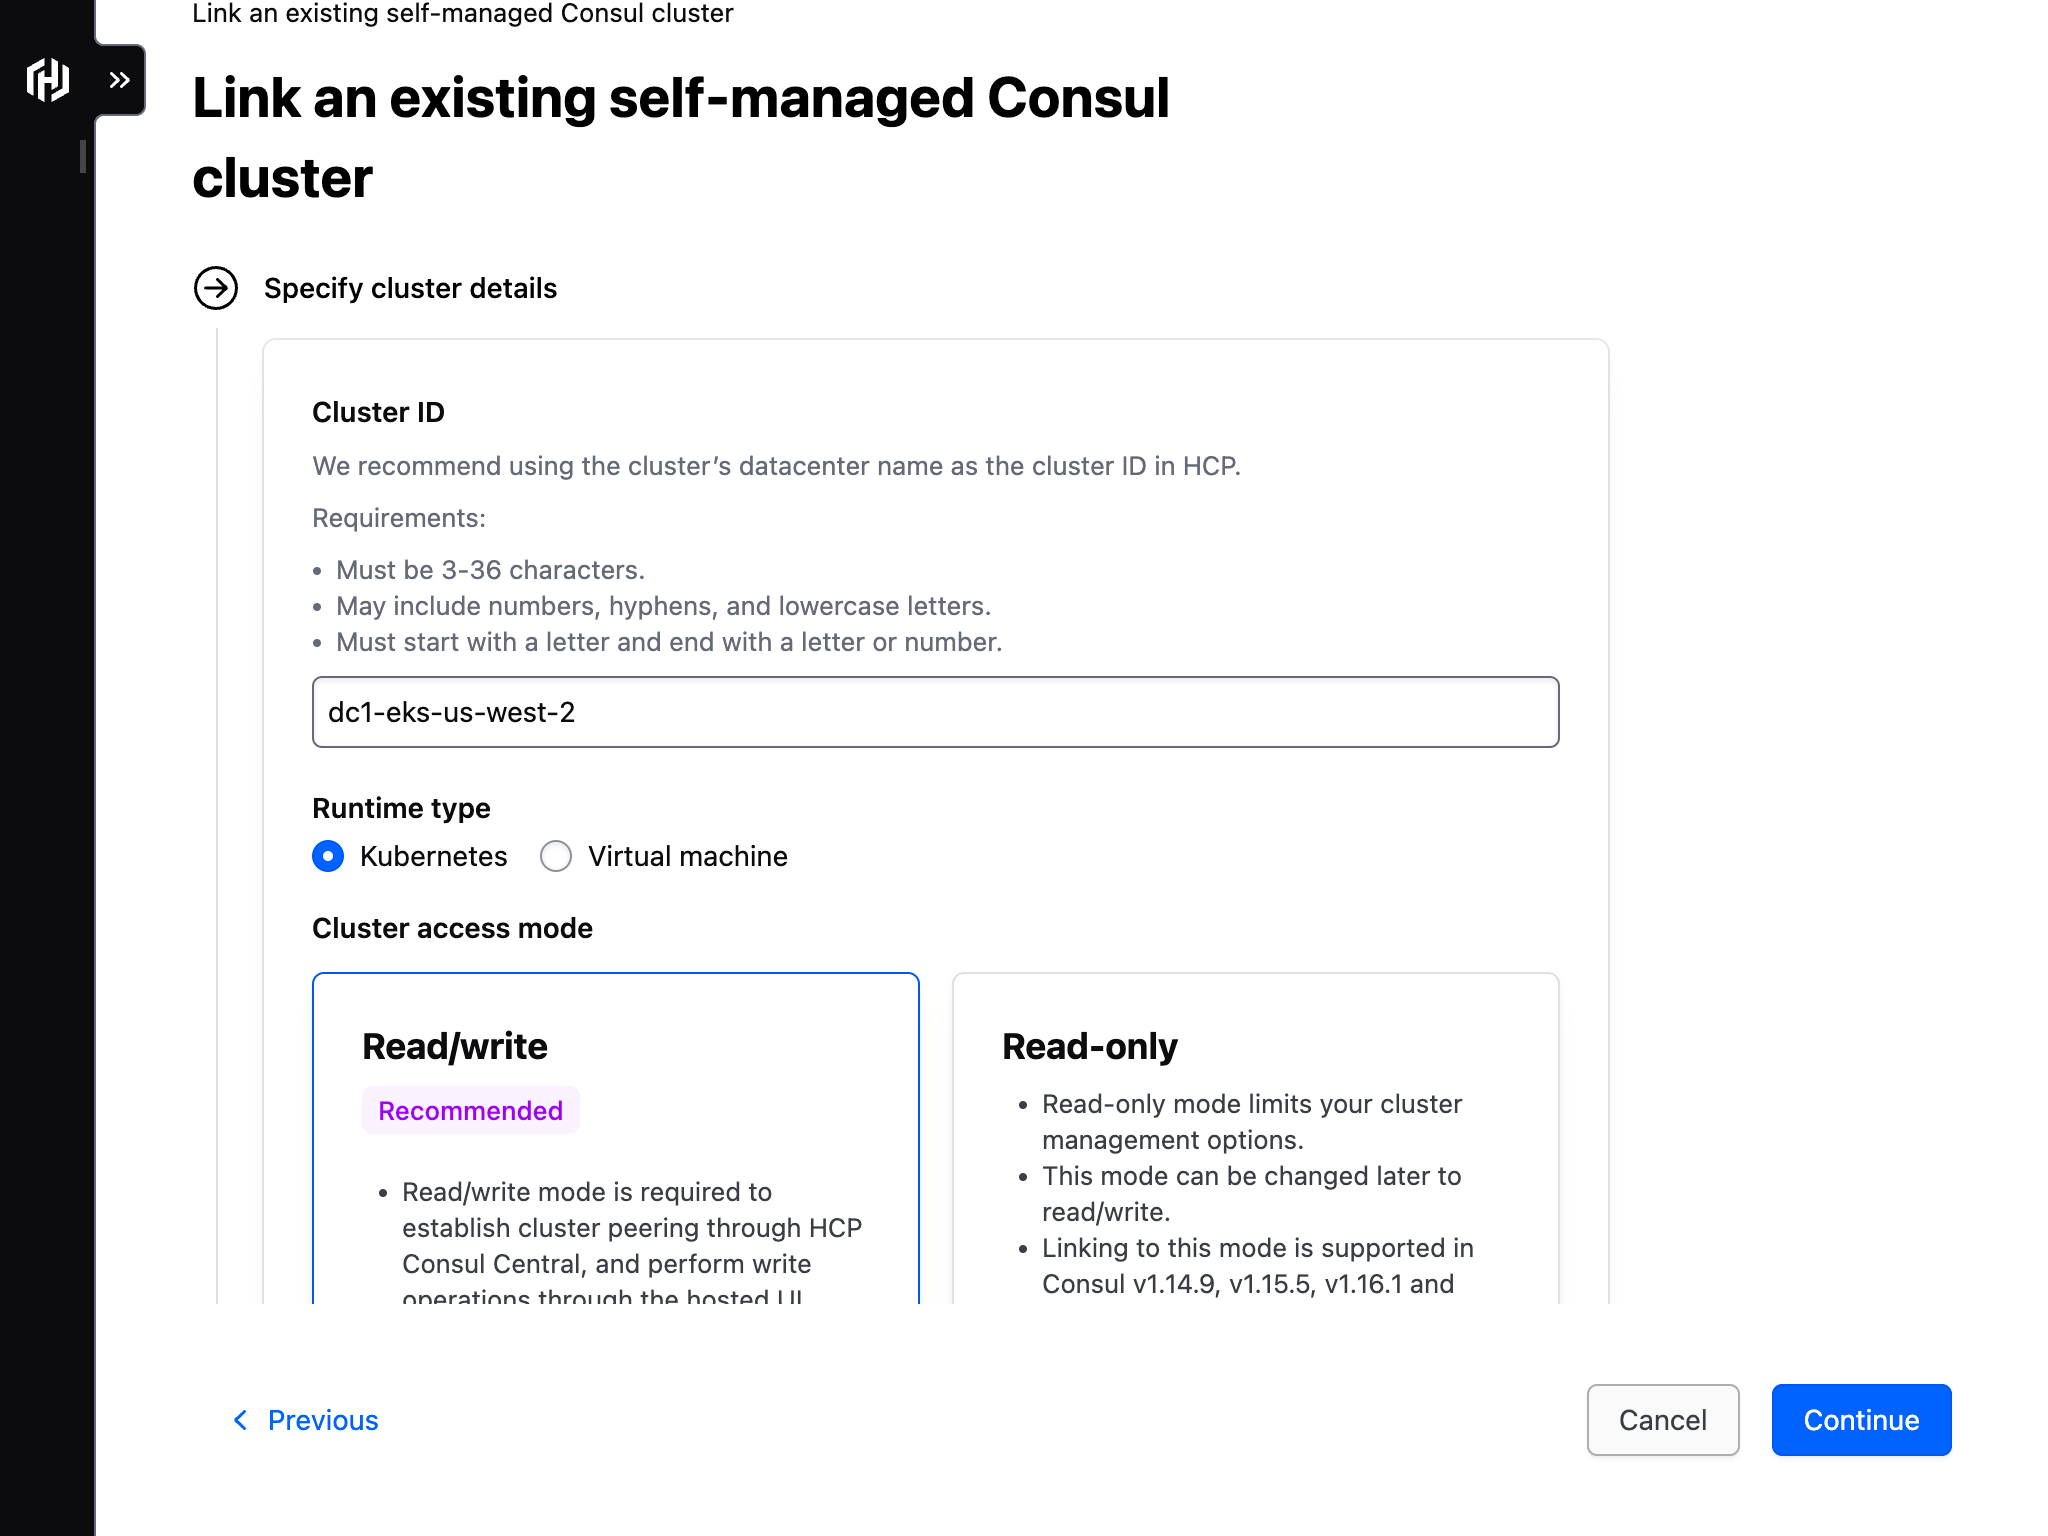 The specify cluster details portion of the link an existing self-managed Consul cluster page.